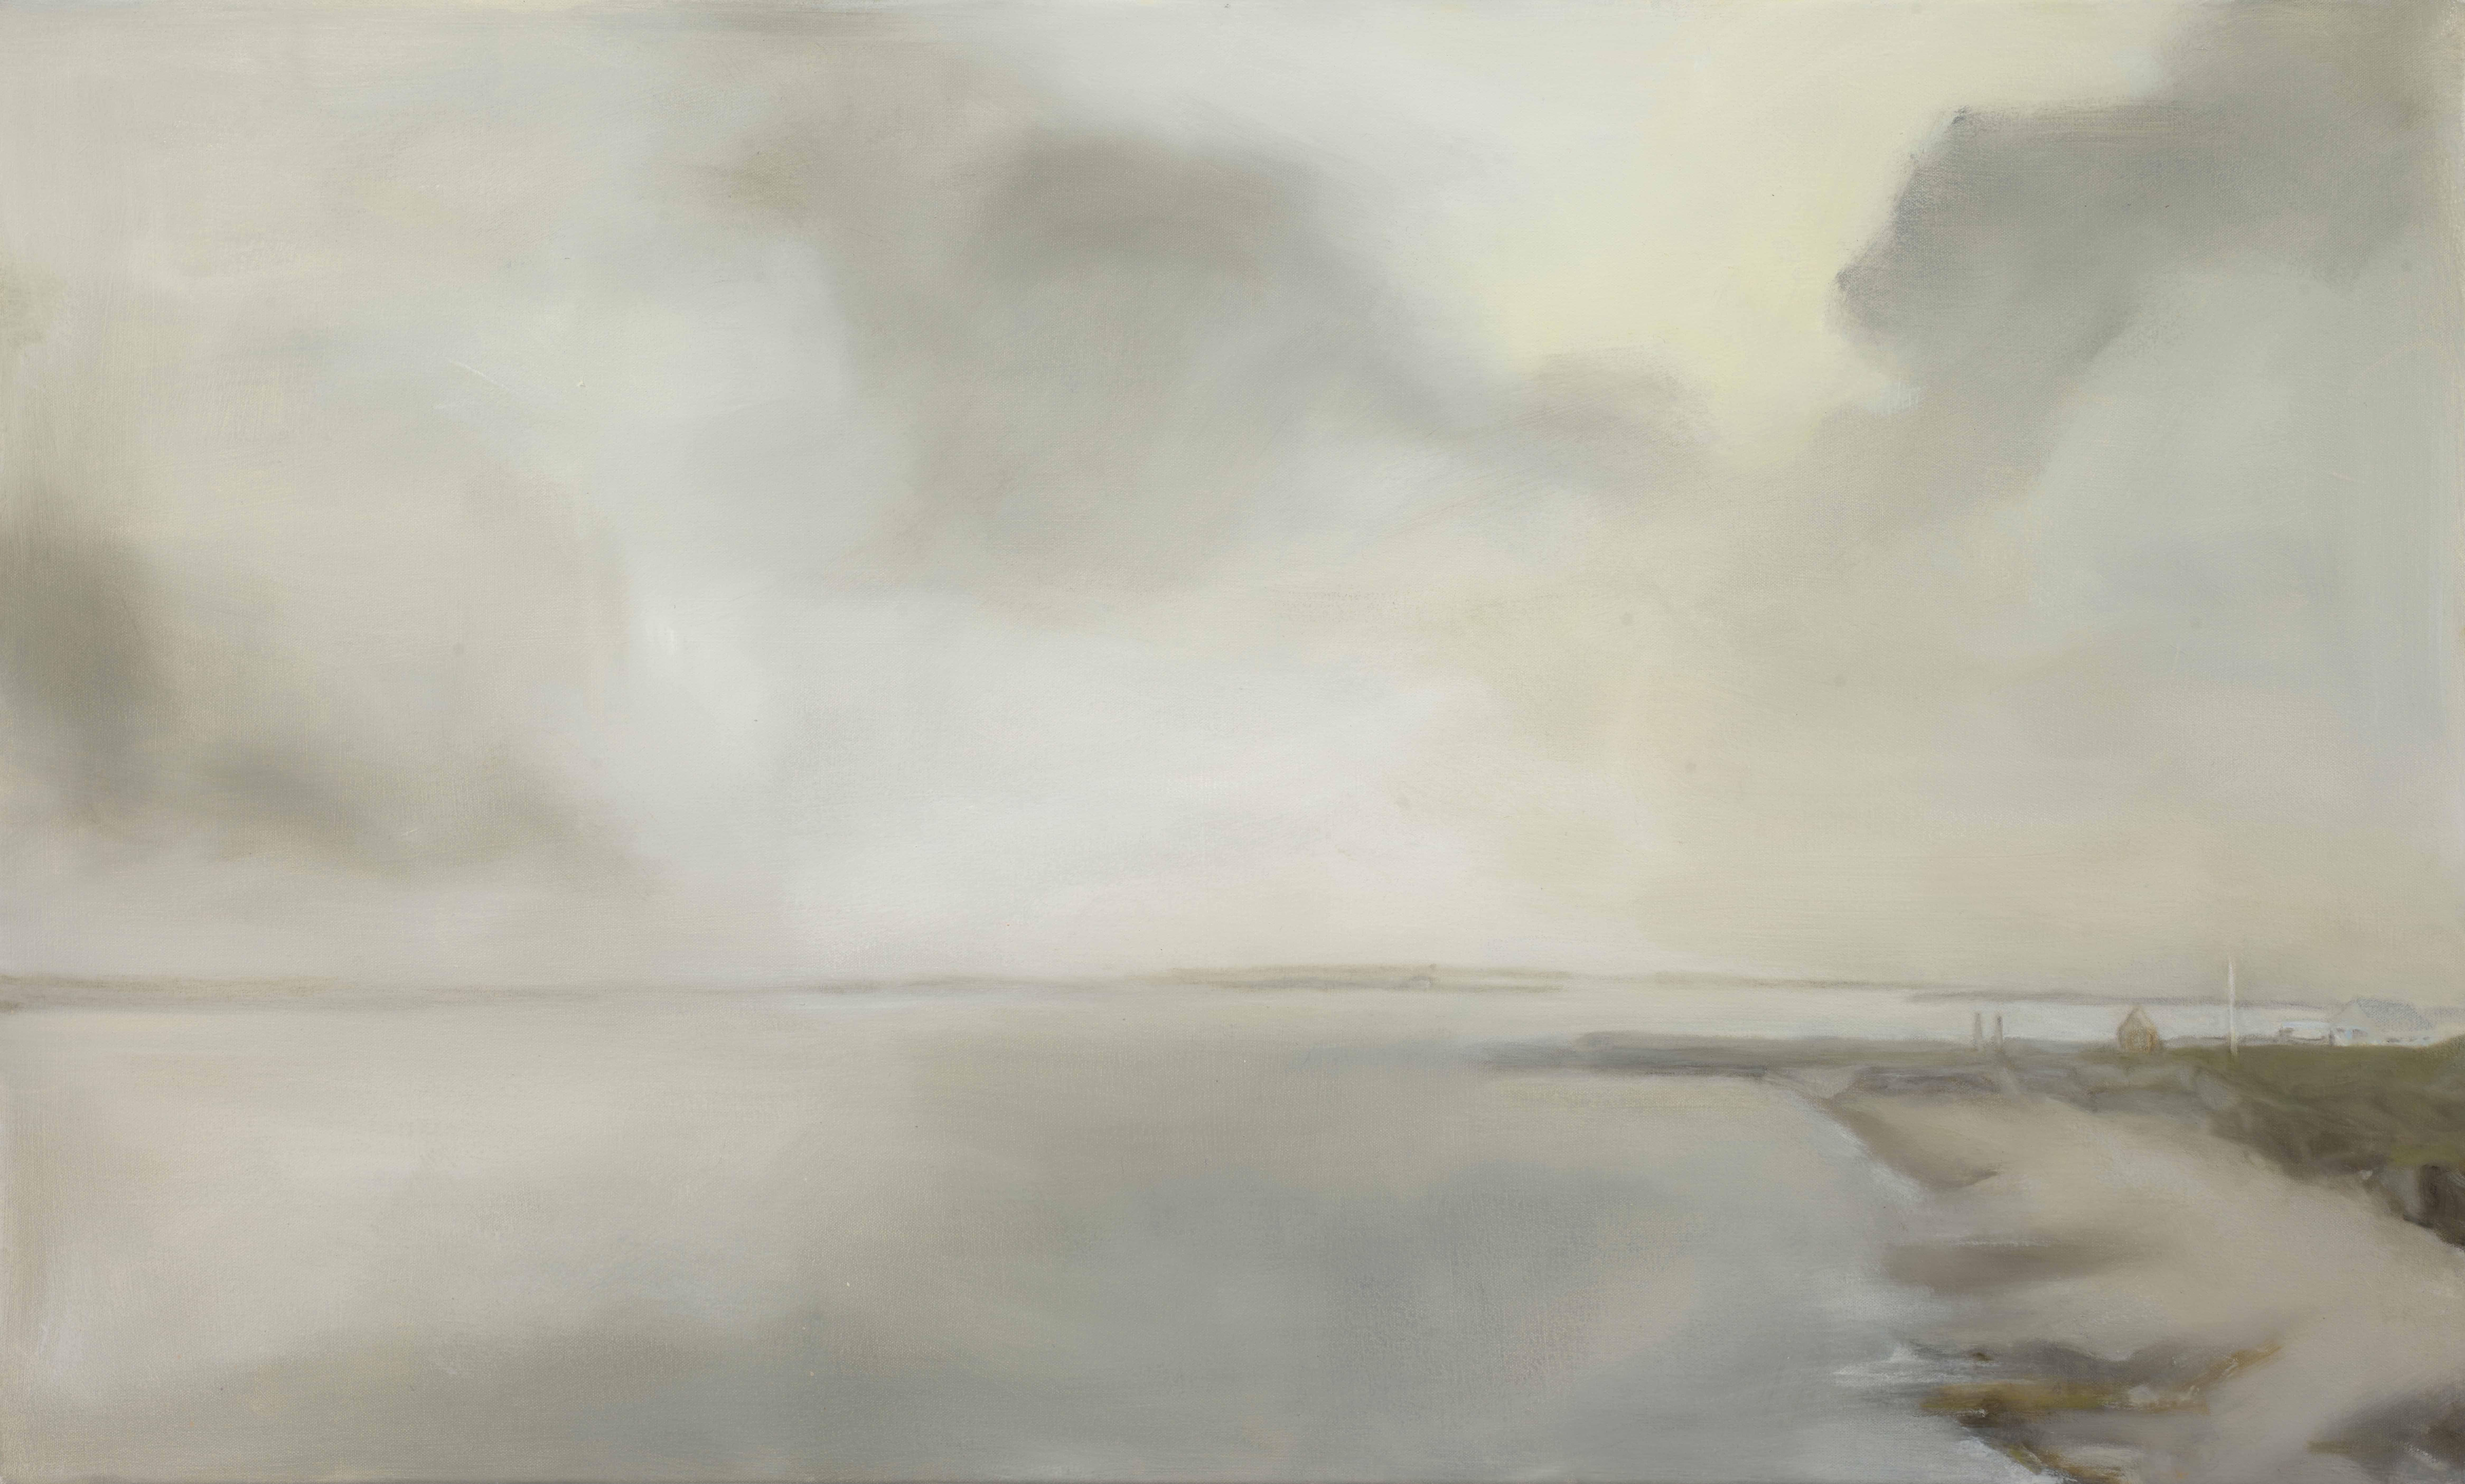 Fog on the Water, 2023, oil on canvas, 24x40 inches